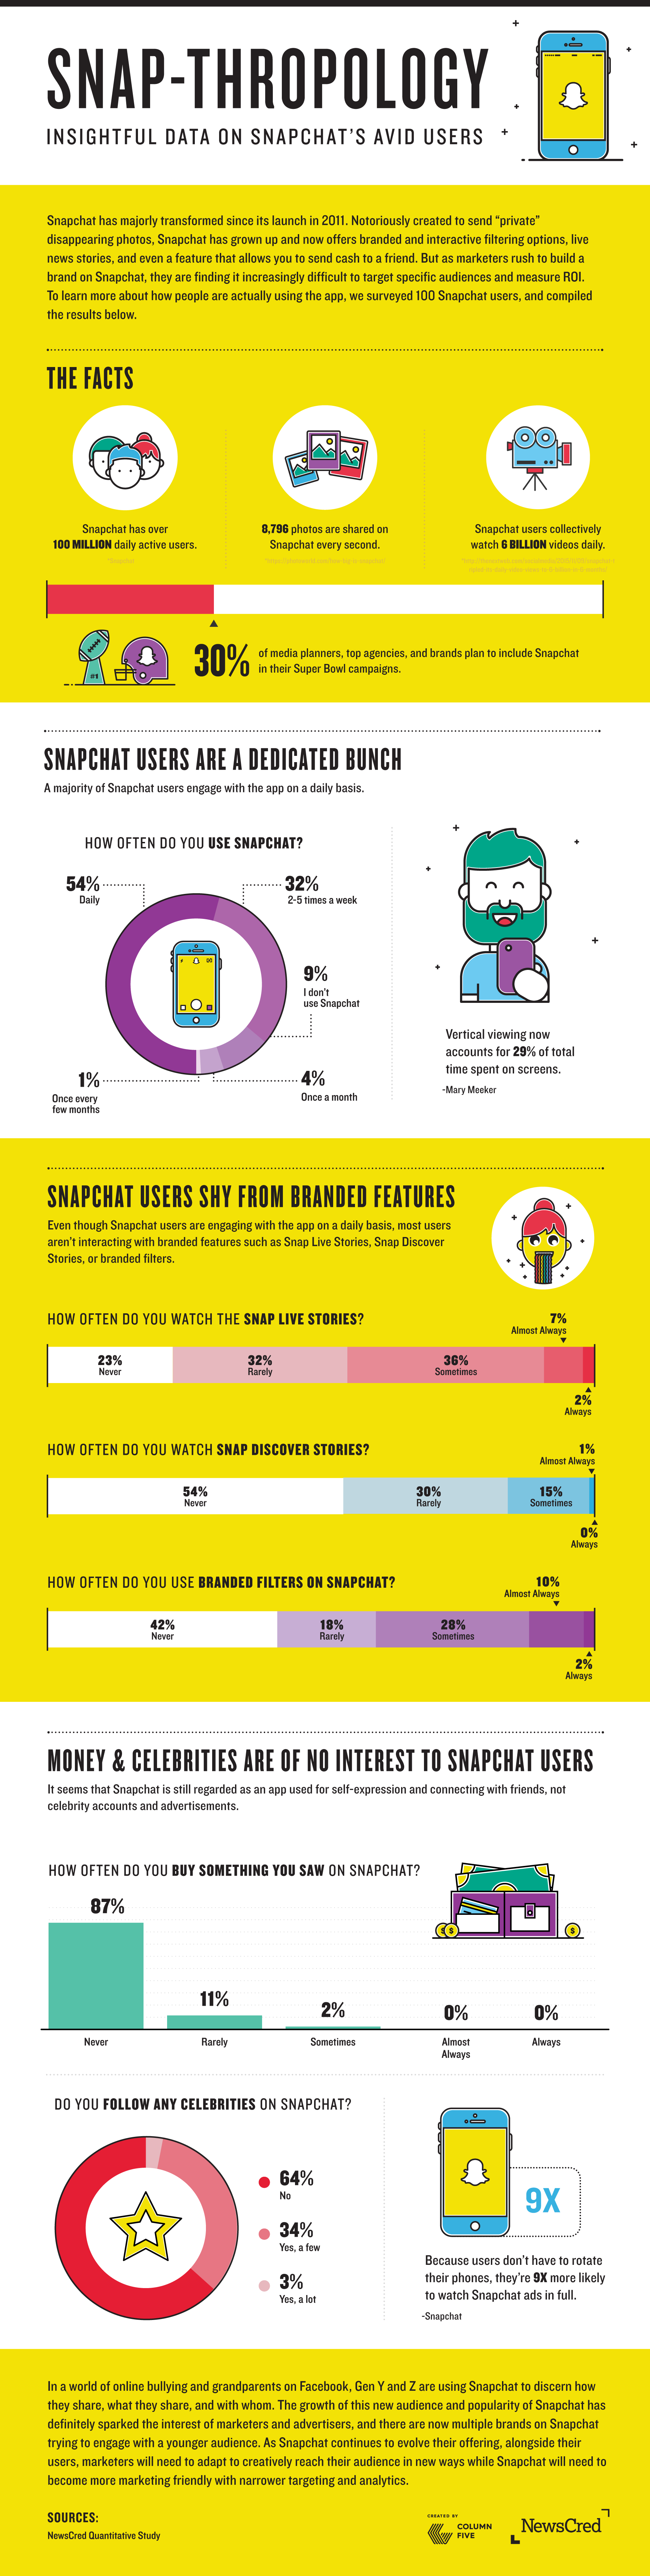 Snap-Thropology Insightful Data on Snapchat's Avid Users [Infographic]